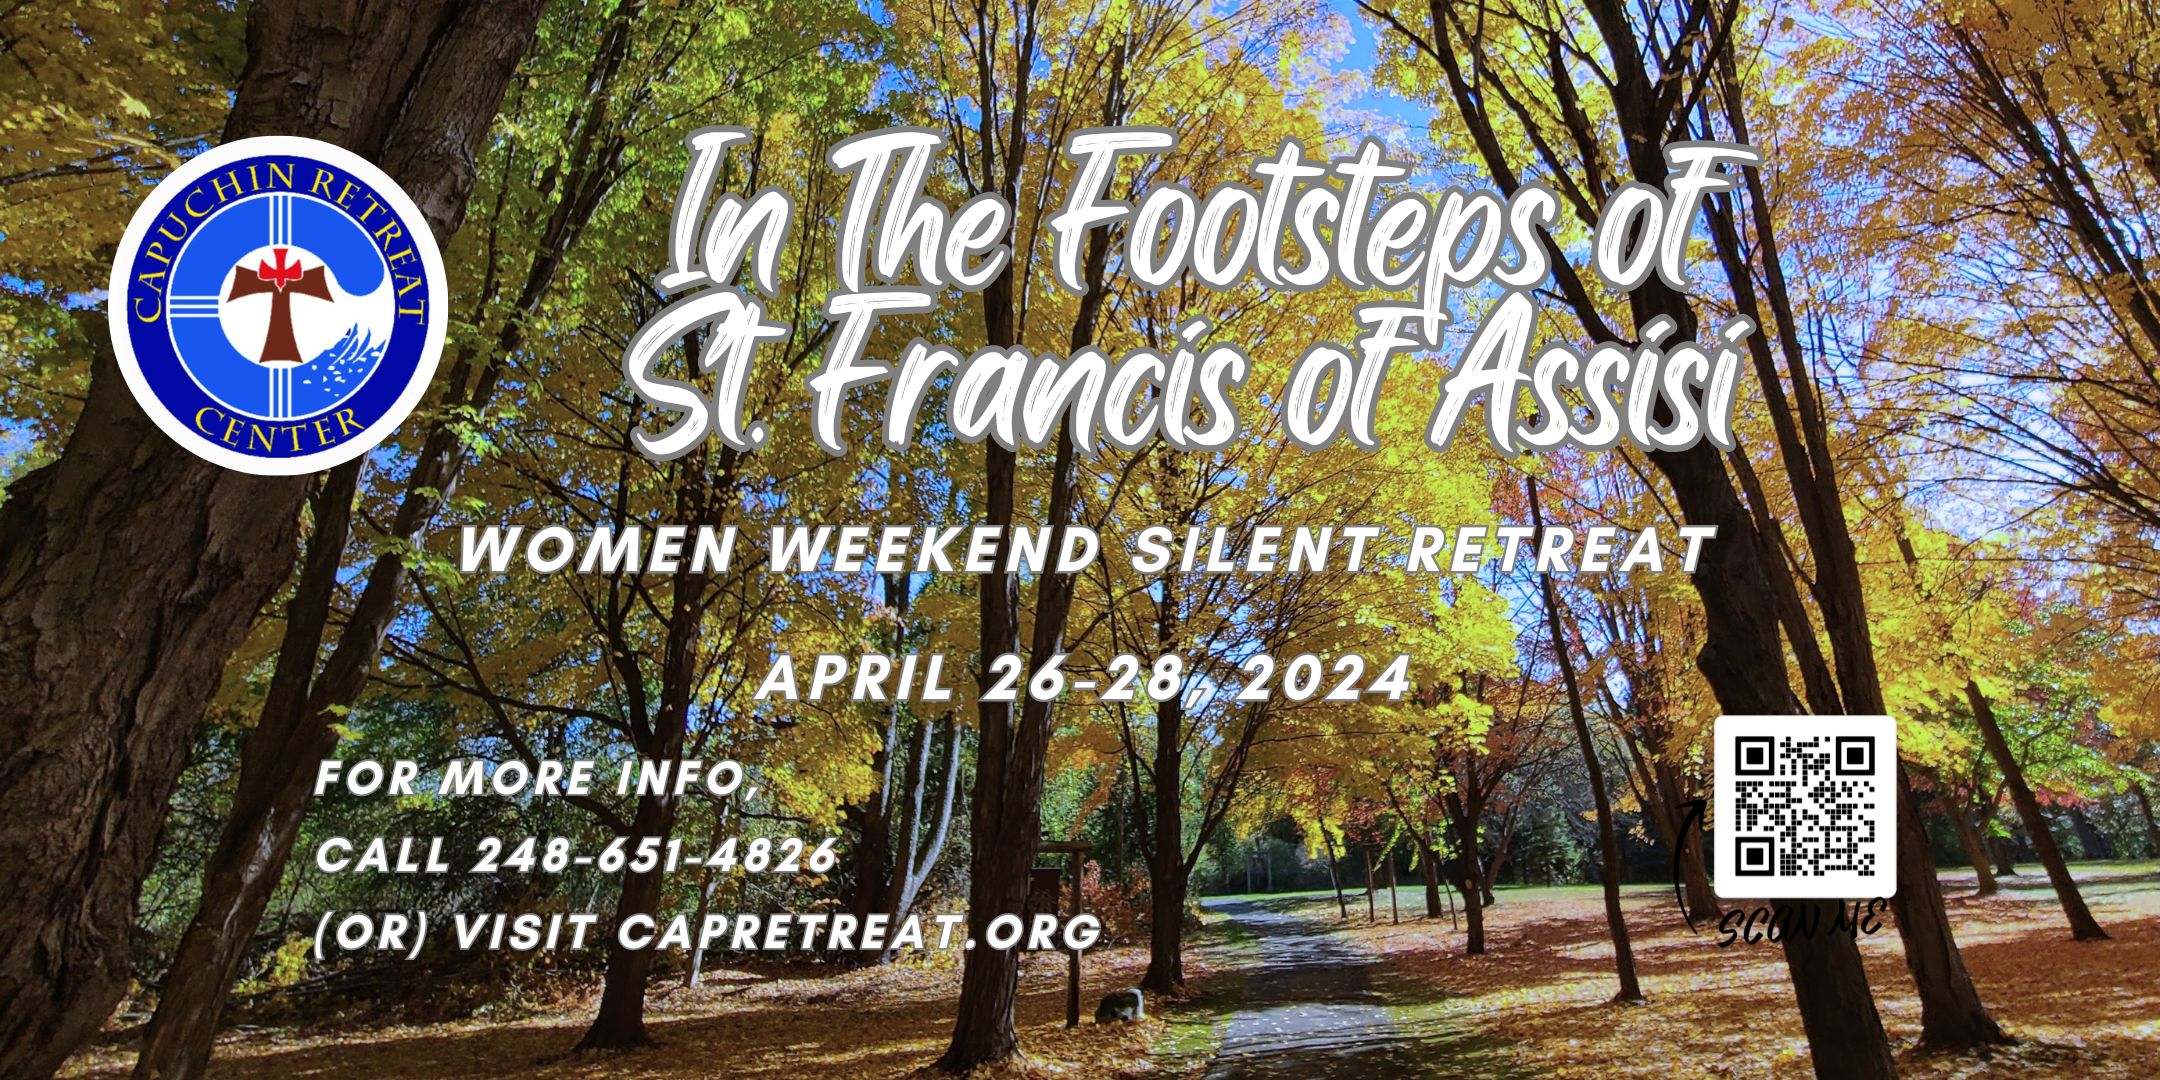 Women’s Weekend Silent Retreat Weekend: “In the Footsteps of St. Francis of Assisi”